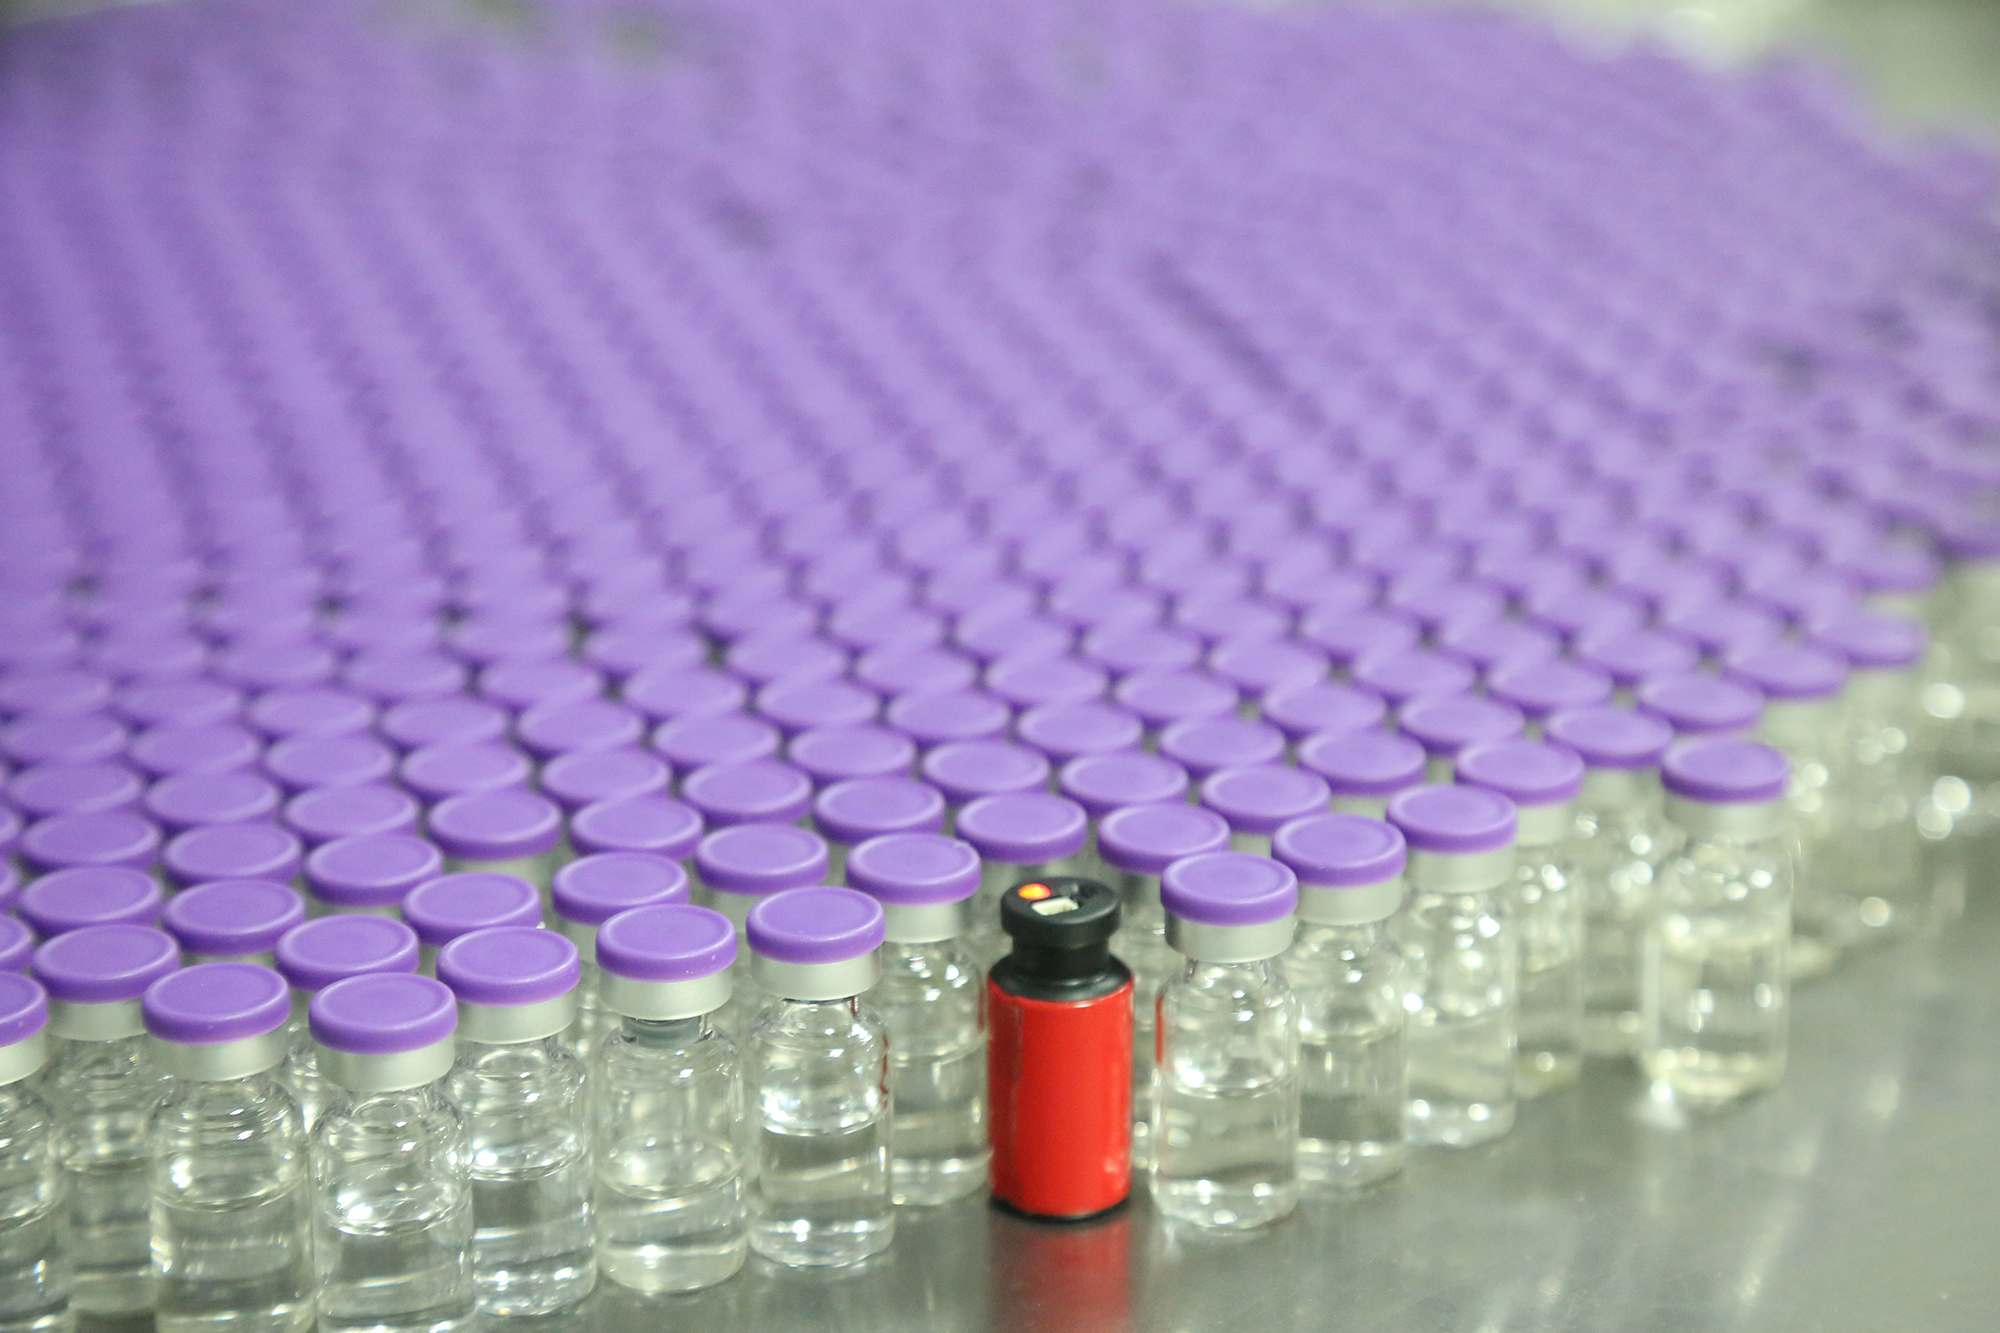 Red vial drone on pharmaceutical manufacturing line with glass vials during SmartSkin services